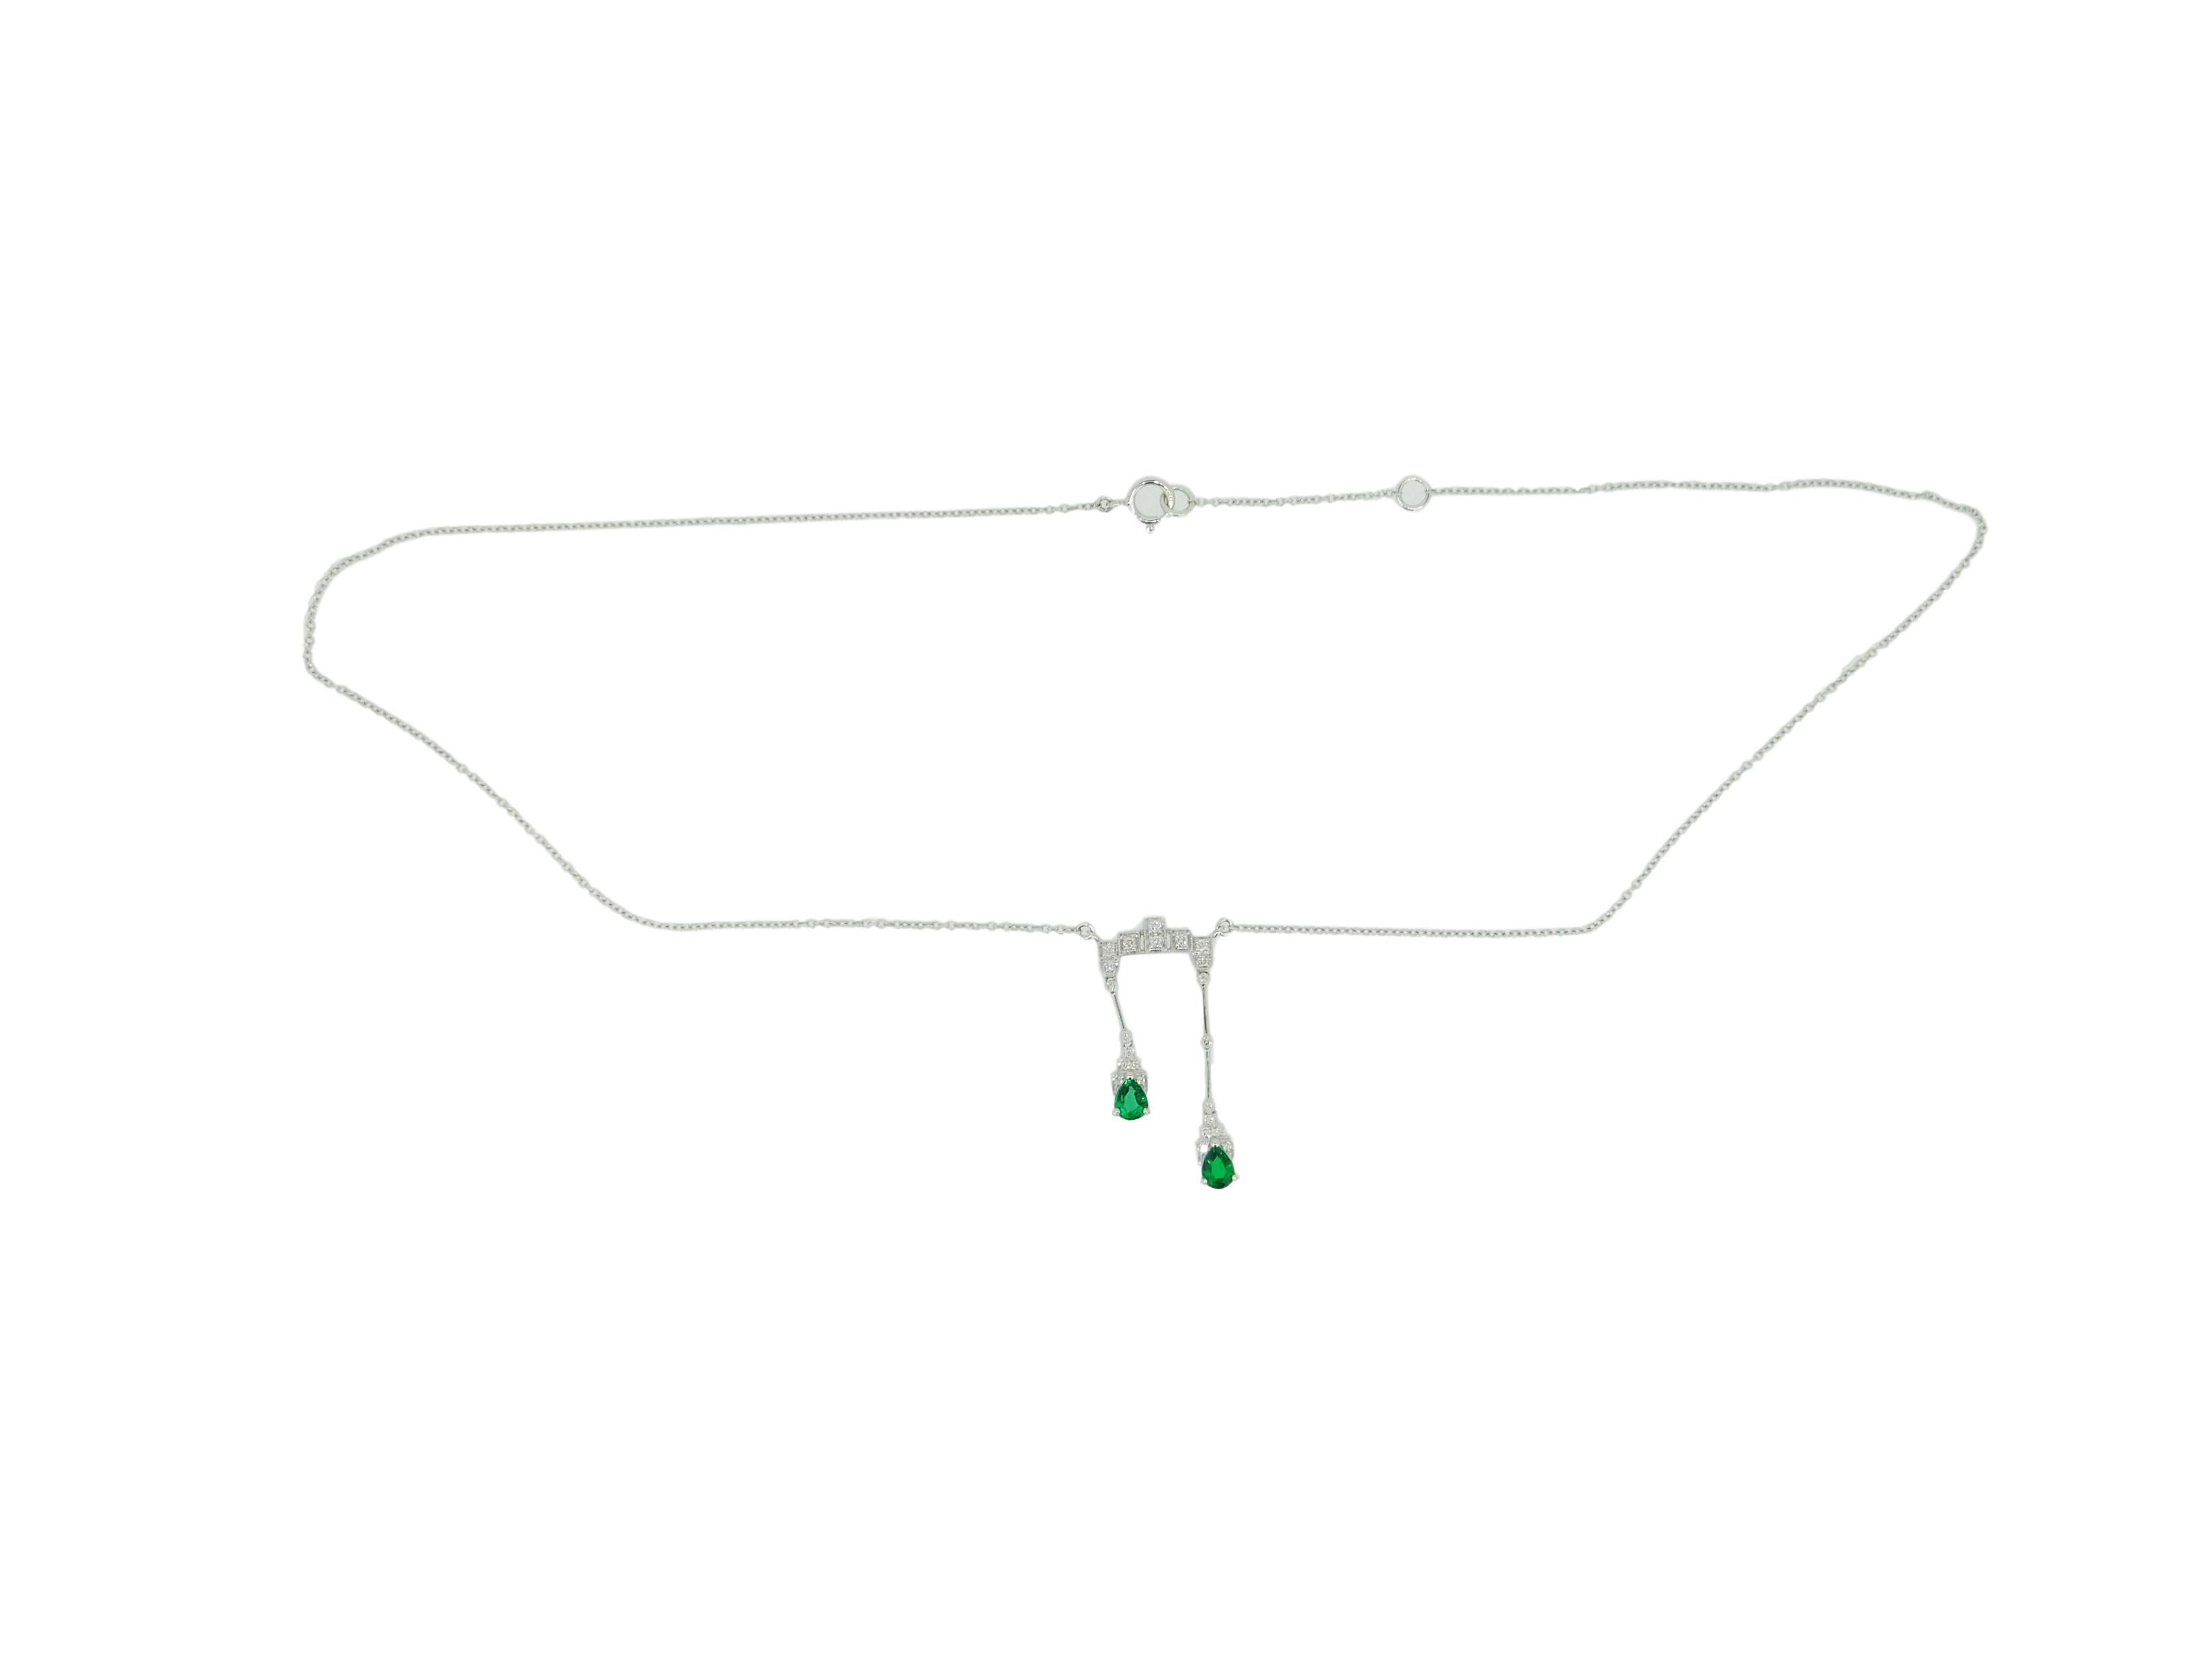 Contemporary 18k White Gold Double Drop Genuine Natural Emerald and Diamond Necklace '#J4715' For Sale